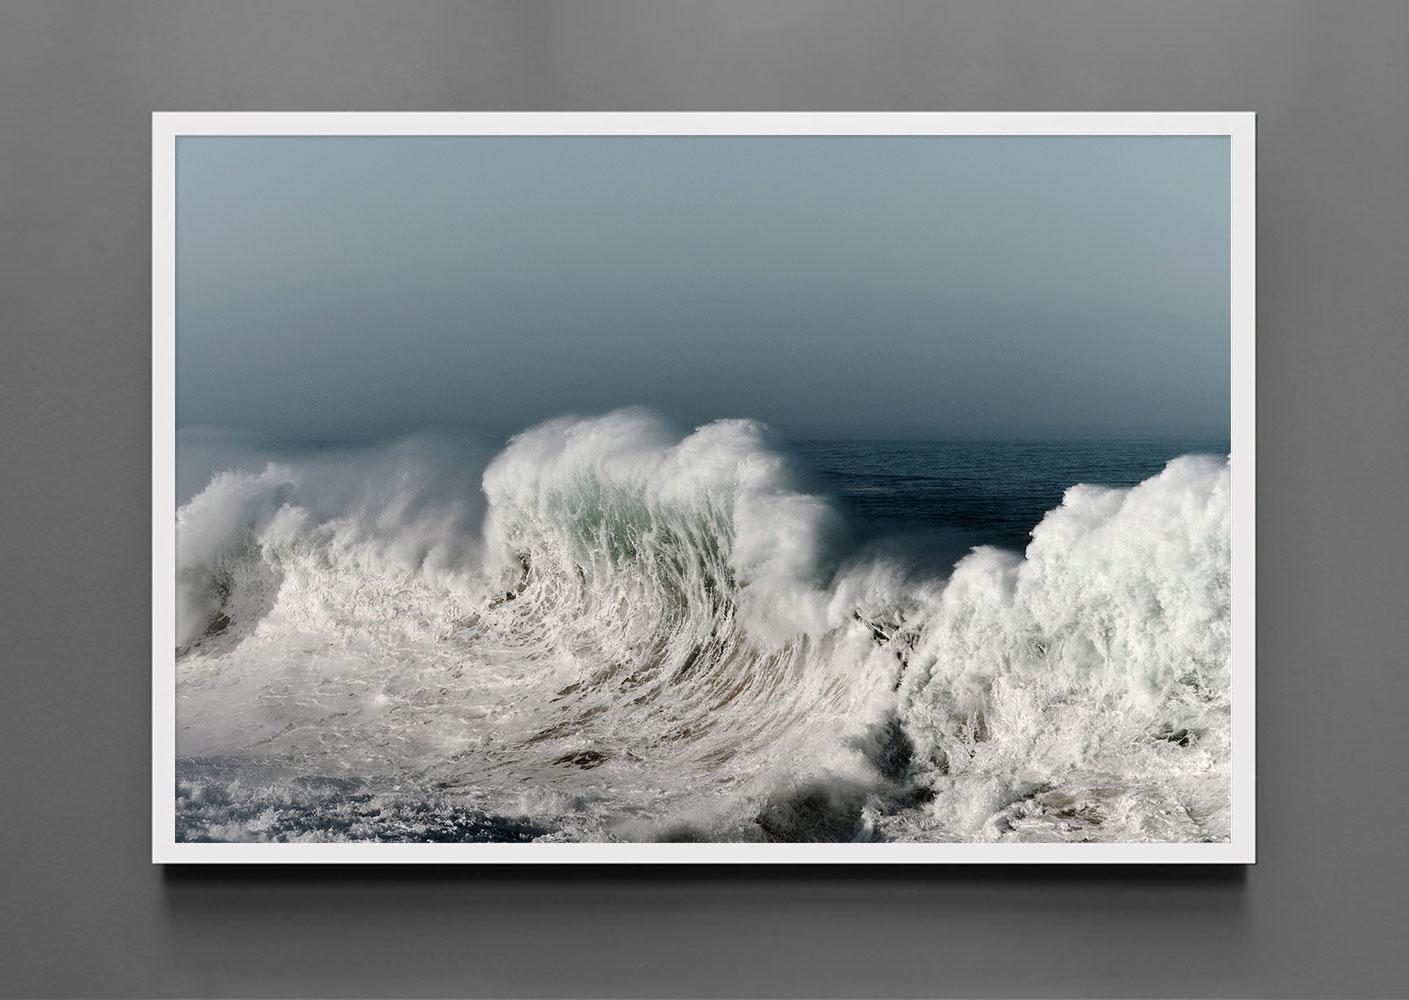 Mare 384 - Seascape photograph - Photograph by Alessandro Puccinelli